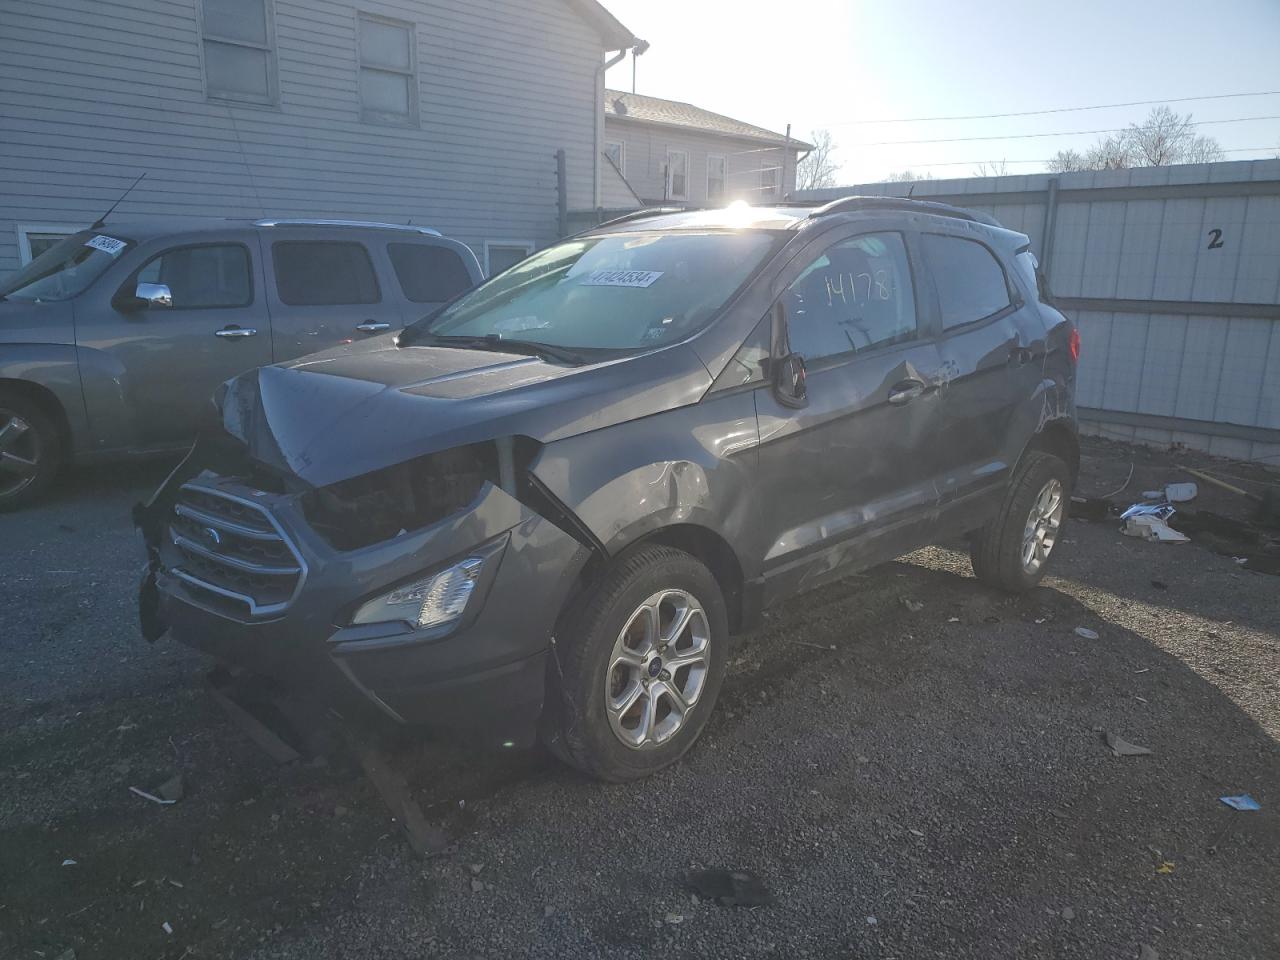 vin: MAJ6S3GL6LC394540 MAJ6S3GL6LC394540 2020 ford ecosport 2000 for Sale in 17370 9787, Pa - York Haven, York Haven, USA